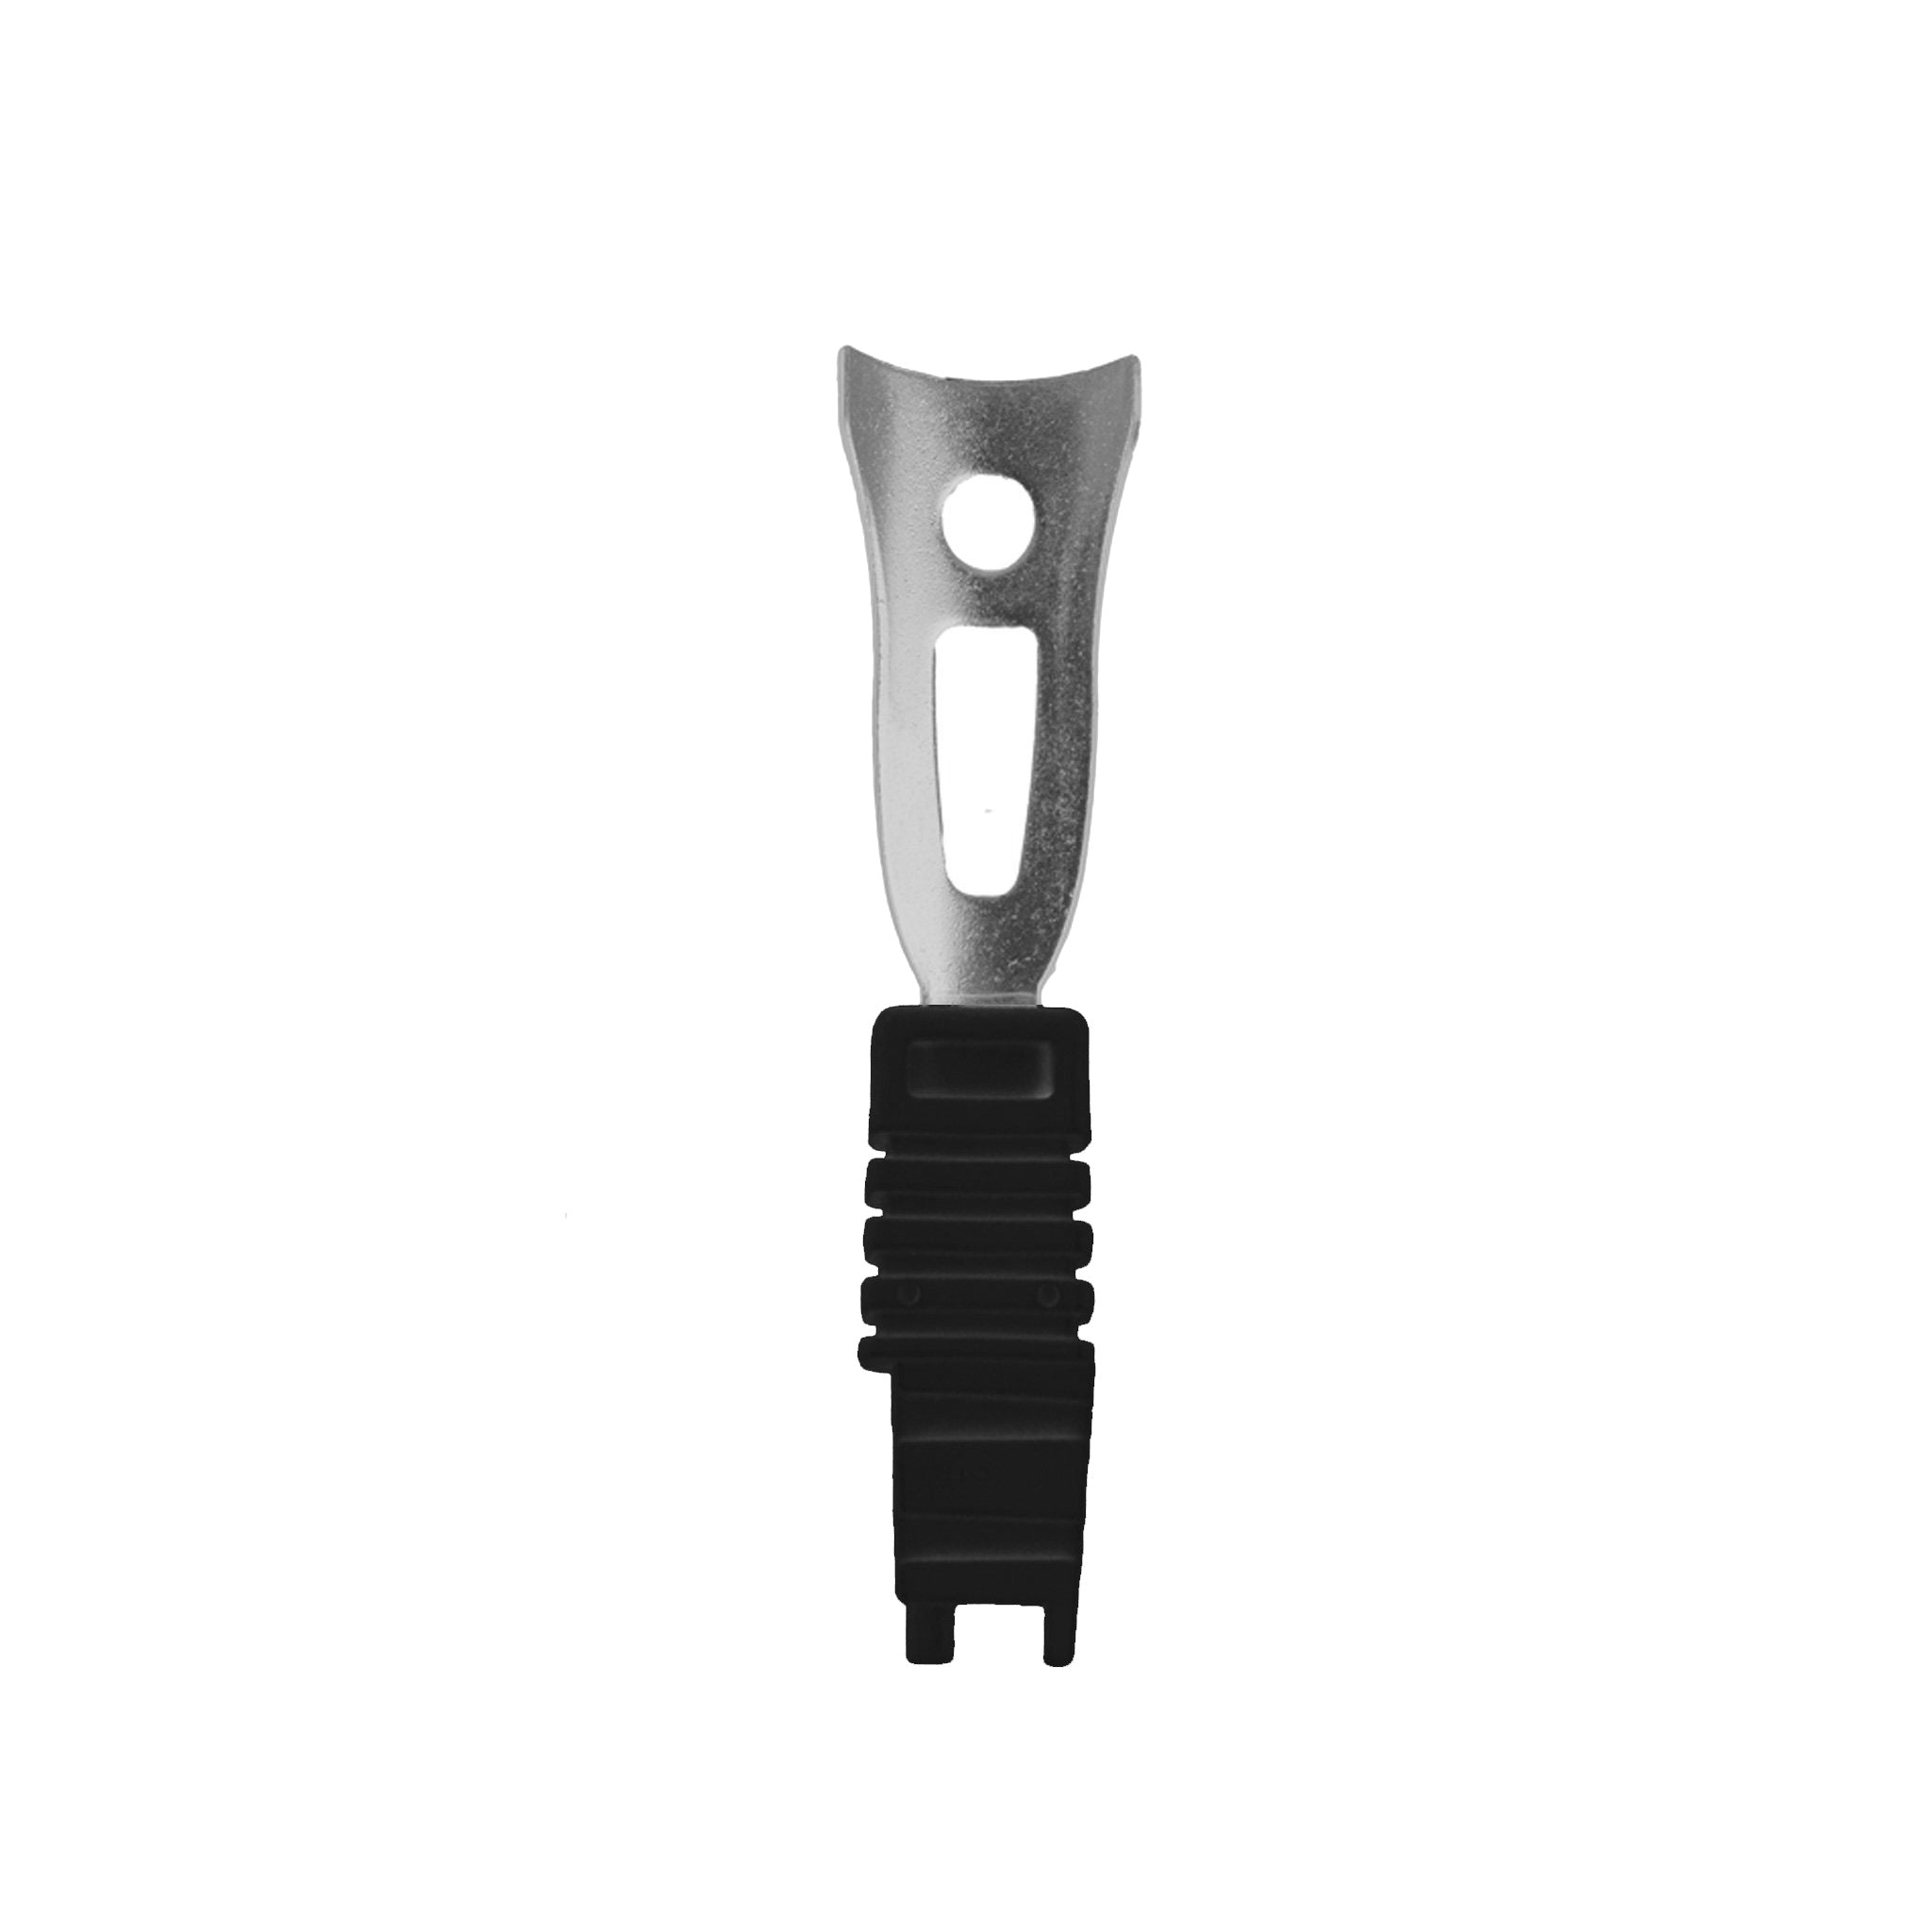 Stainless Steel Cleaning Head for the Tribest®, GS057A, Brush Handle. It is part of the Tribest®, GS060A, Cleaning Tool. Use this attachment to scrape off pulp and residue from your juicing screens.